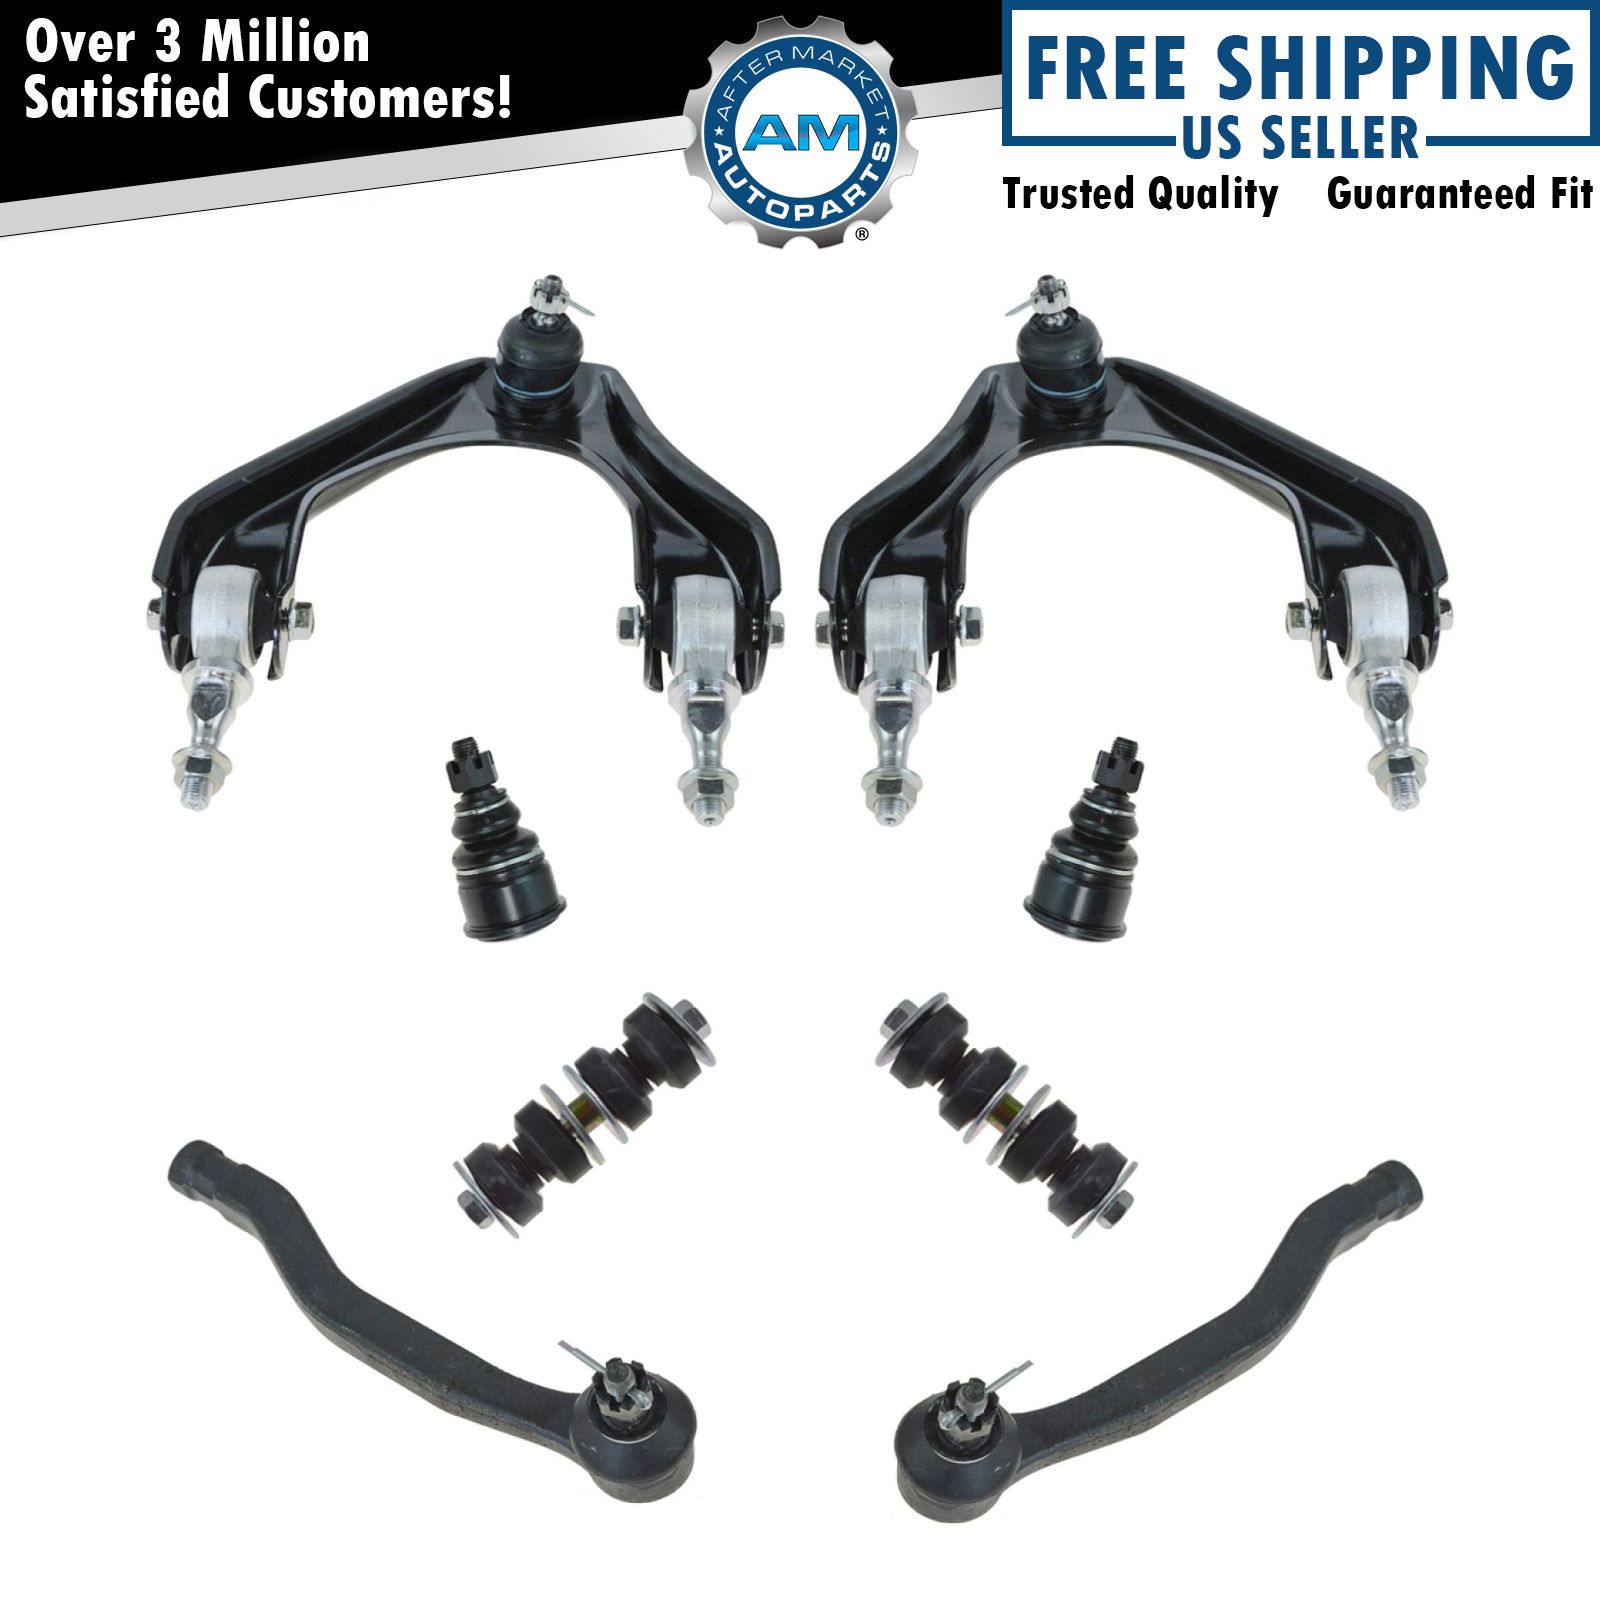 Front Suspension Kit Set of 8 for Acura CL Honda Accord Odyssey Oasis